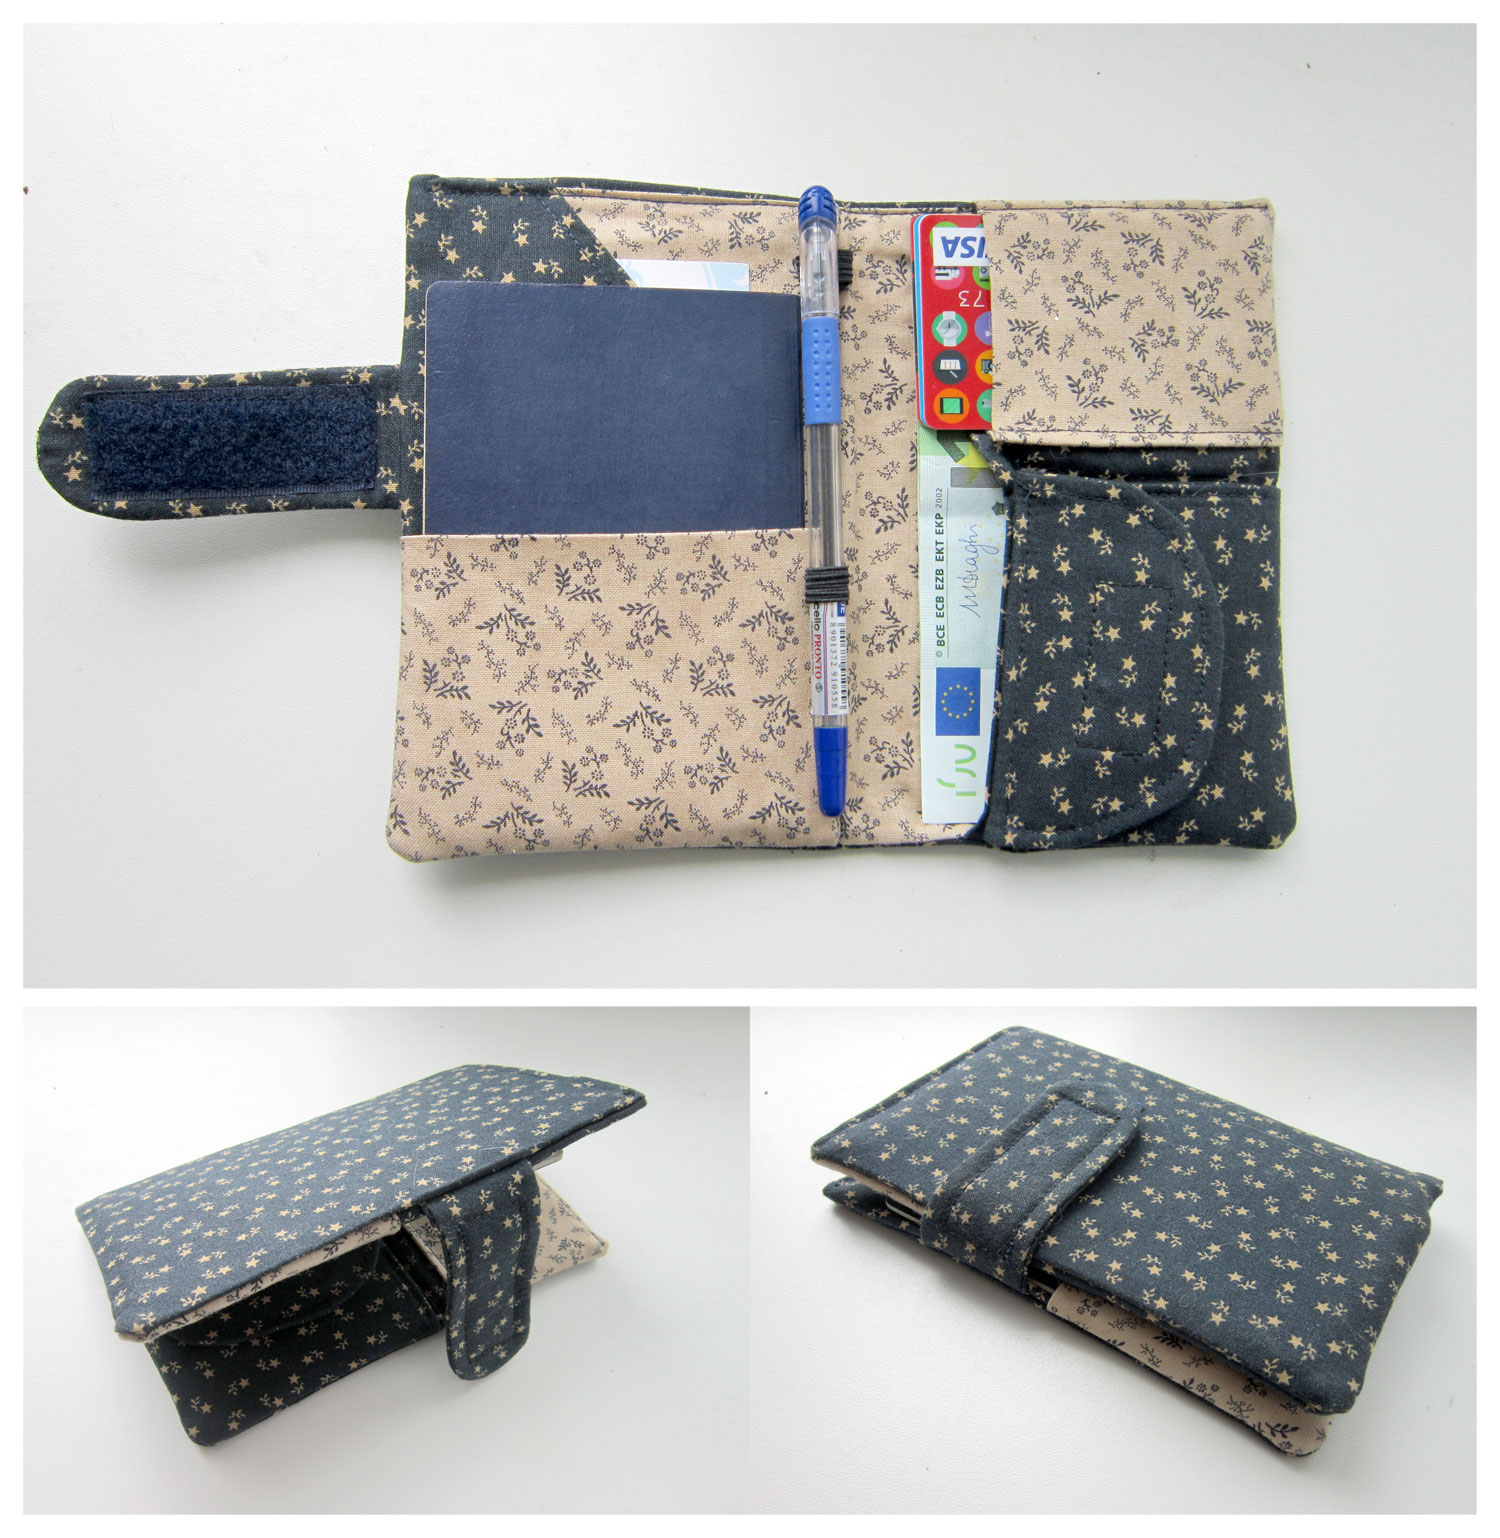 How to sew a travel holder or travel wallet, sewing pattern